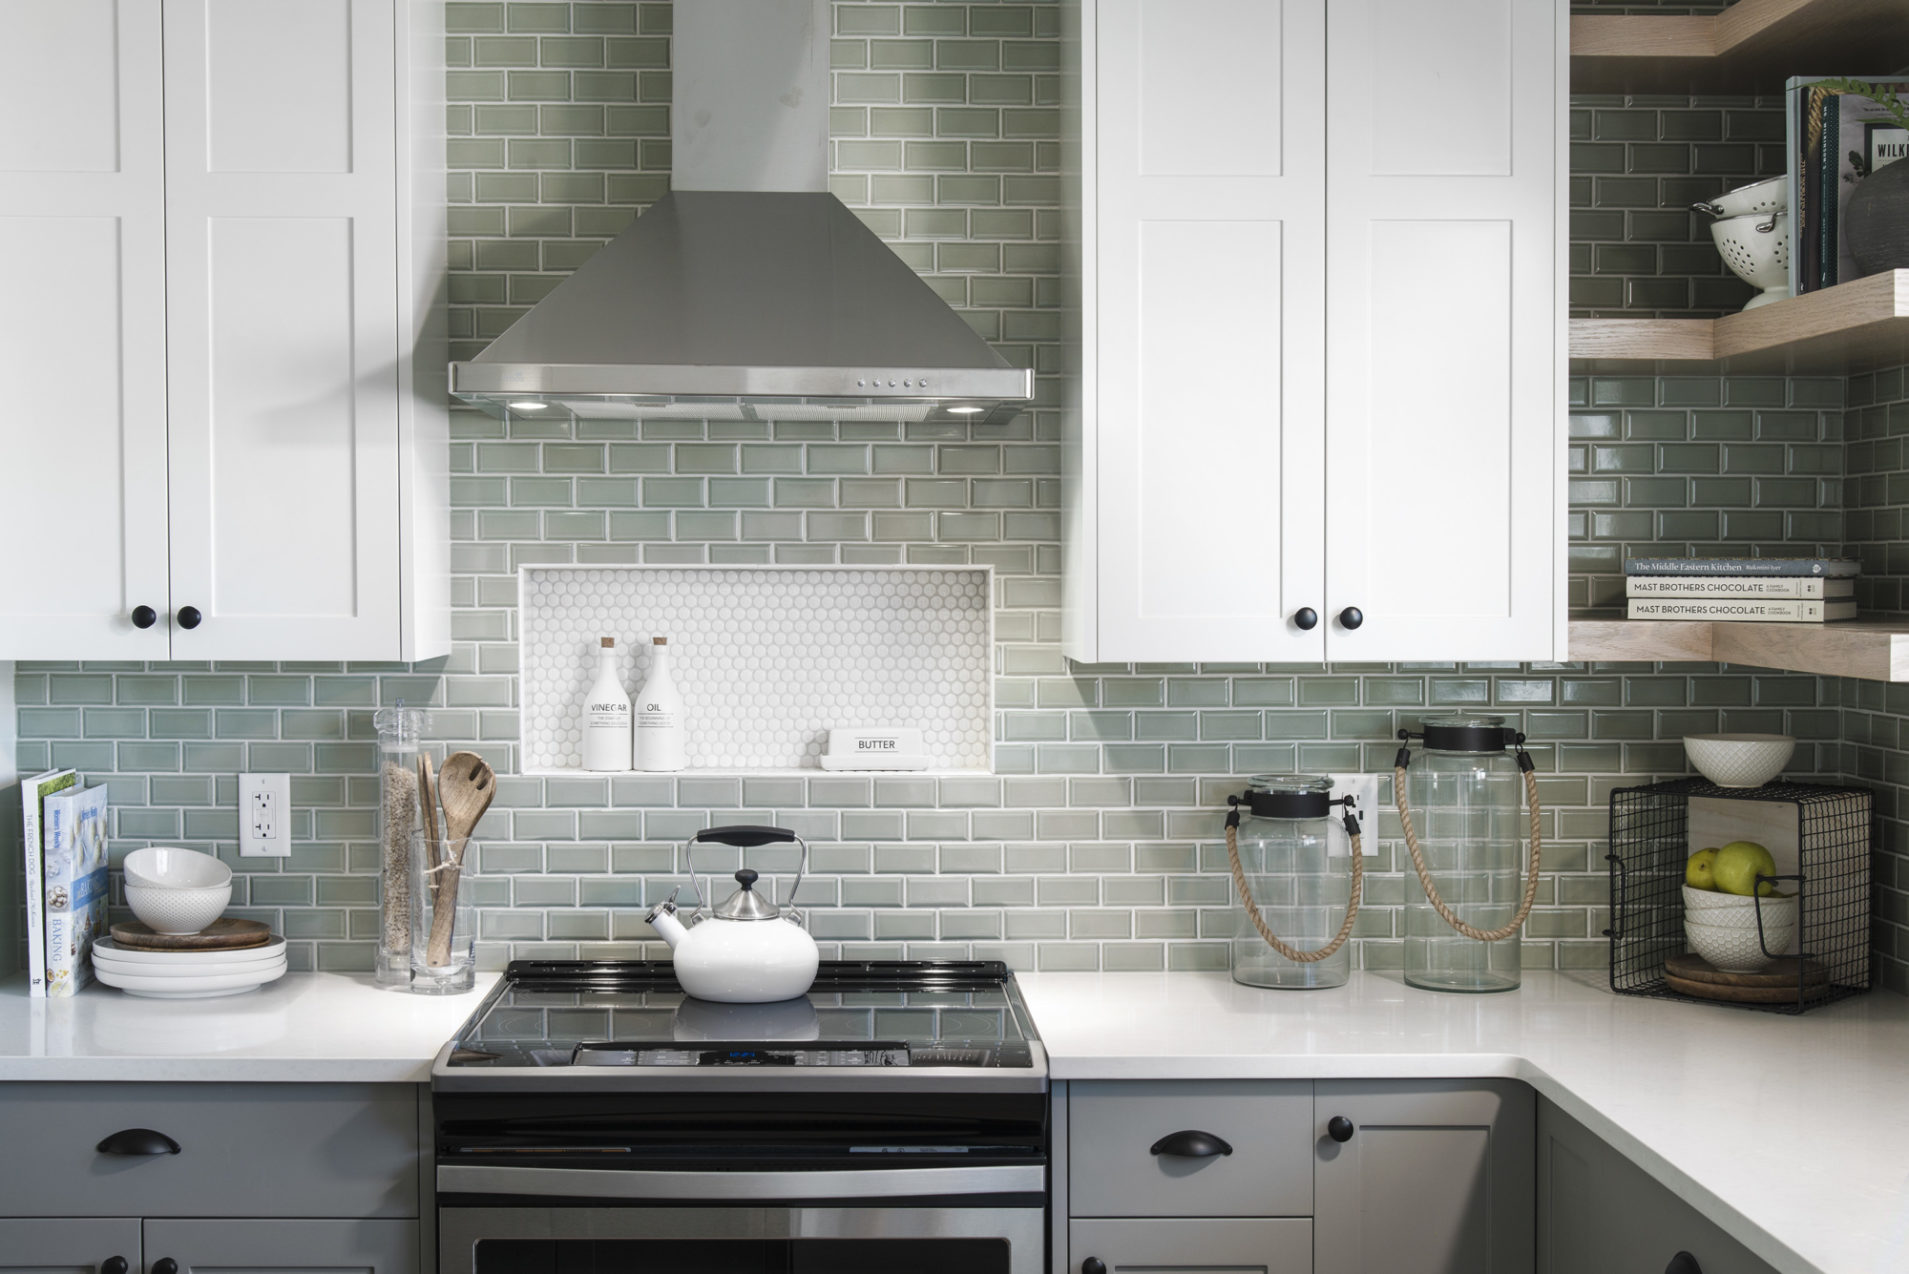 A kitchen with sage green tiles, and grey and white cabinets.